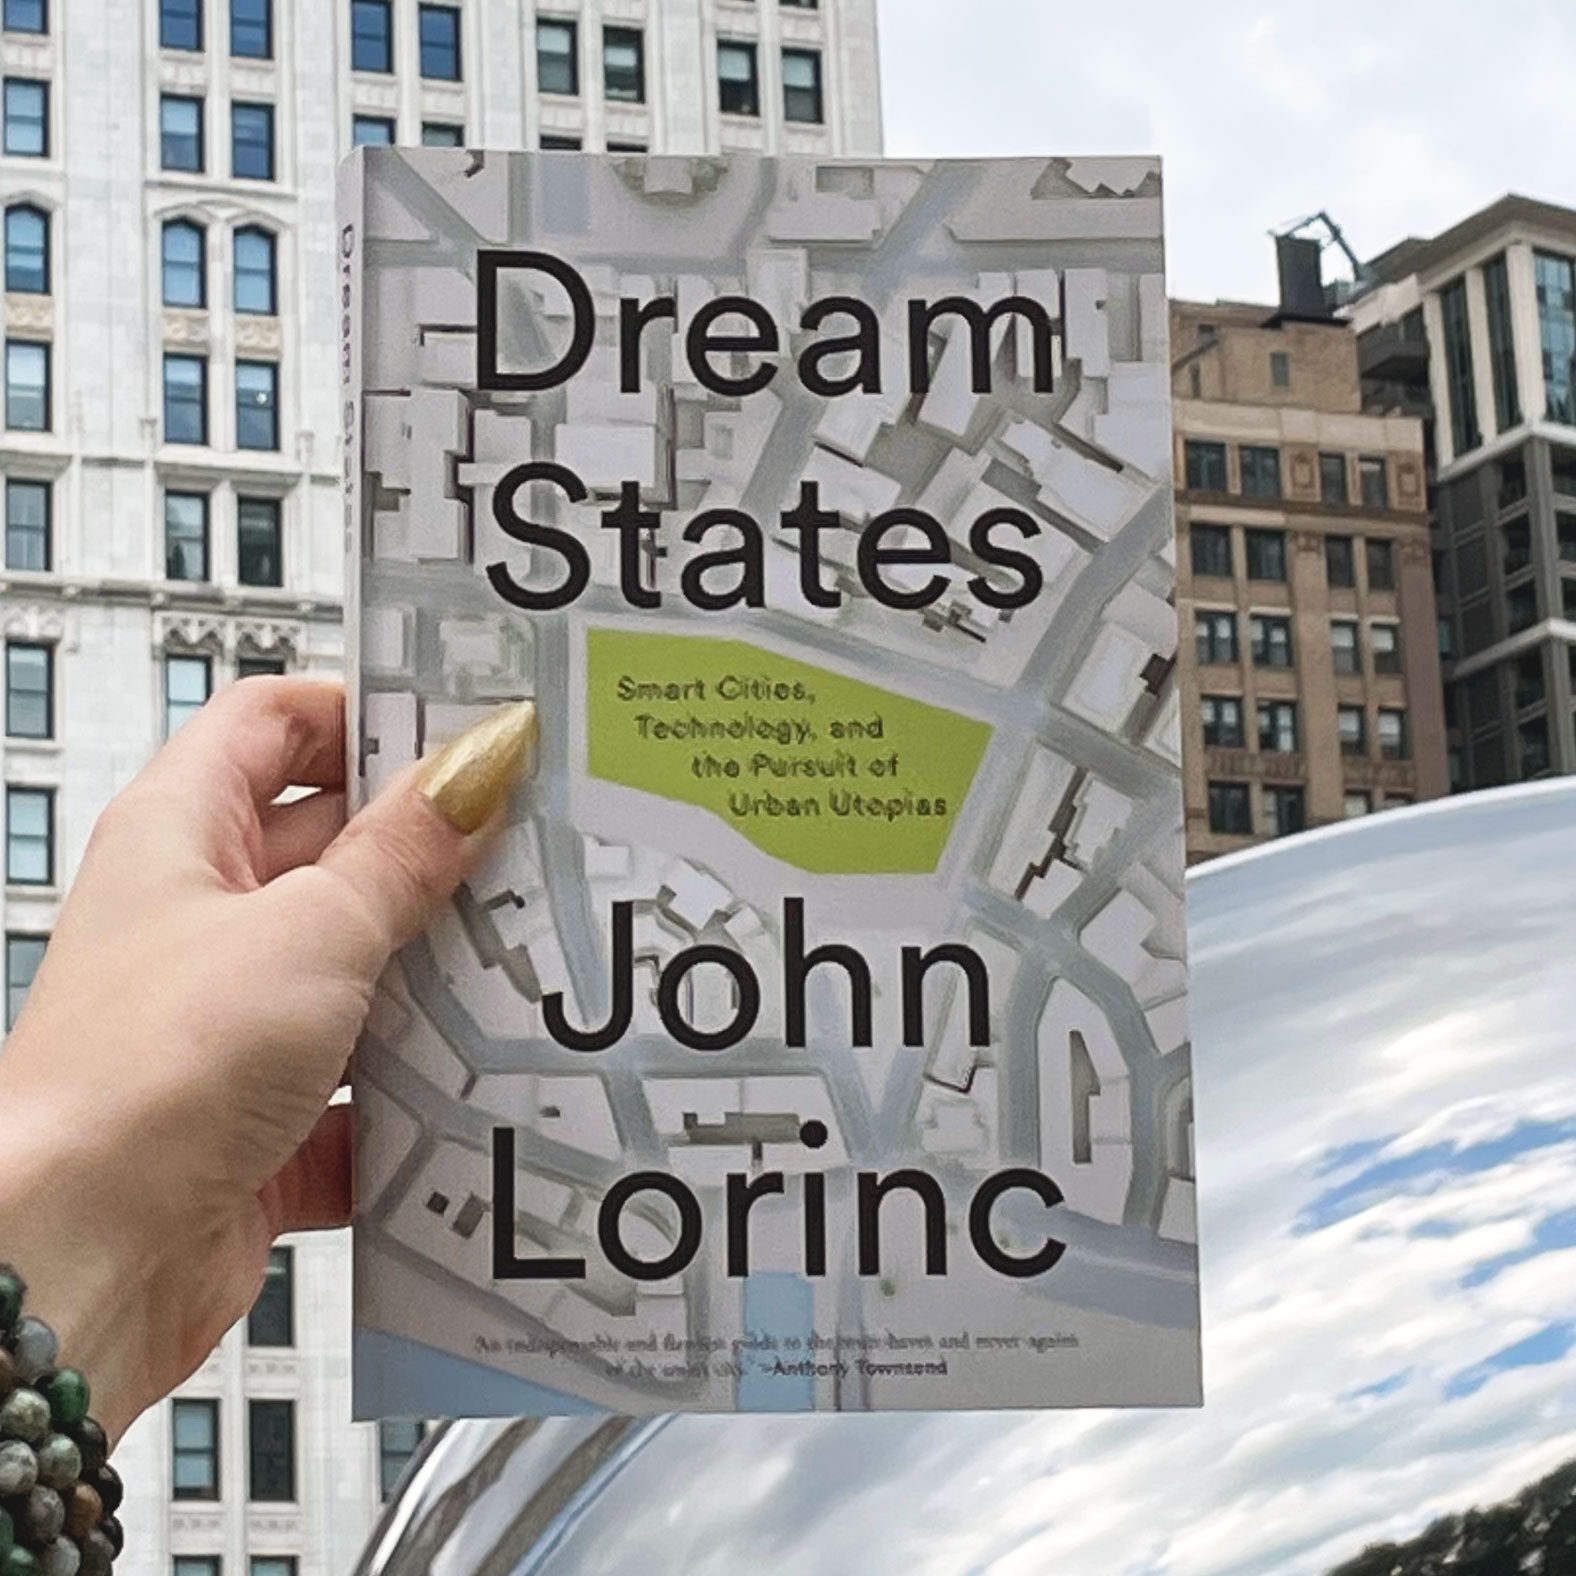 Dream States: Smart Cities, Technology, and the Pursuit of Urban Utopias book cover